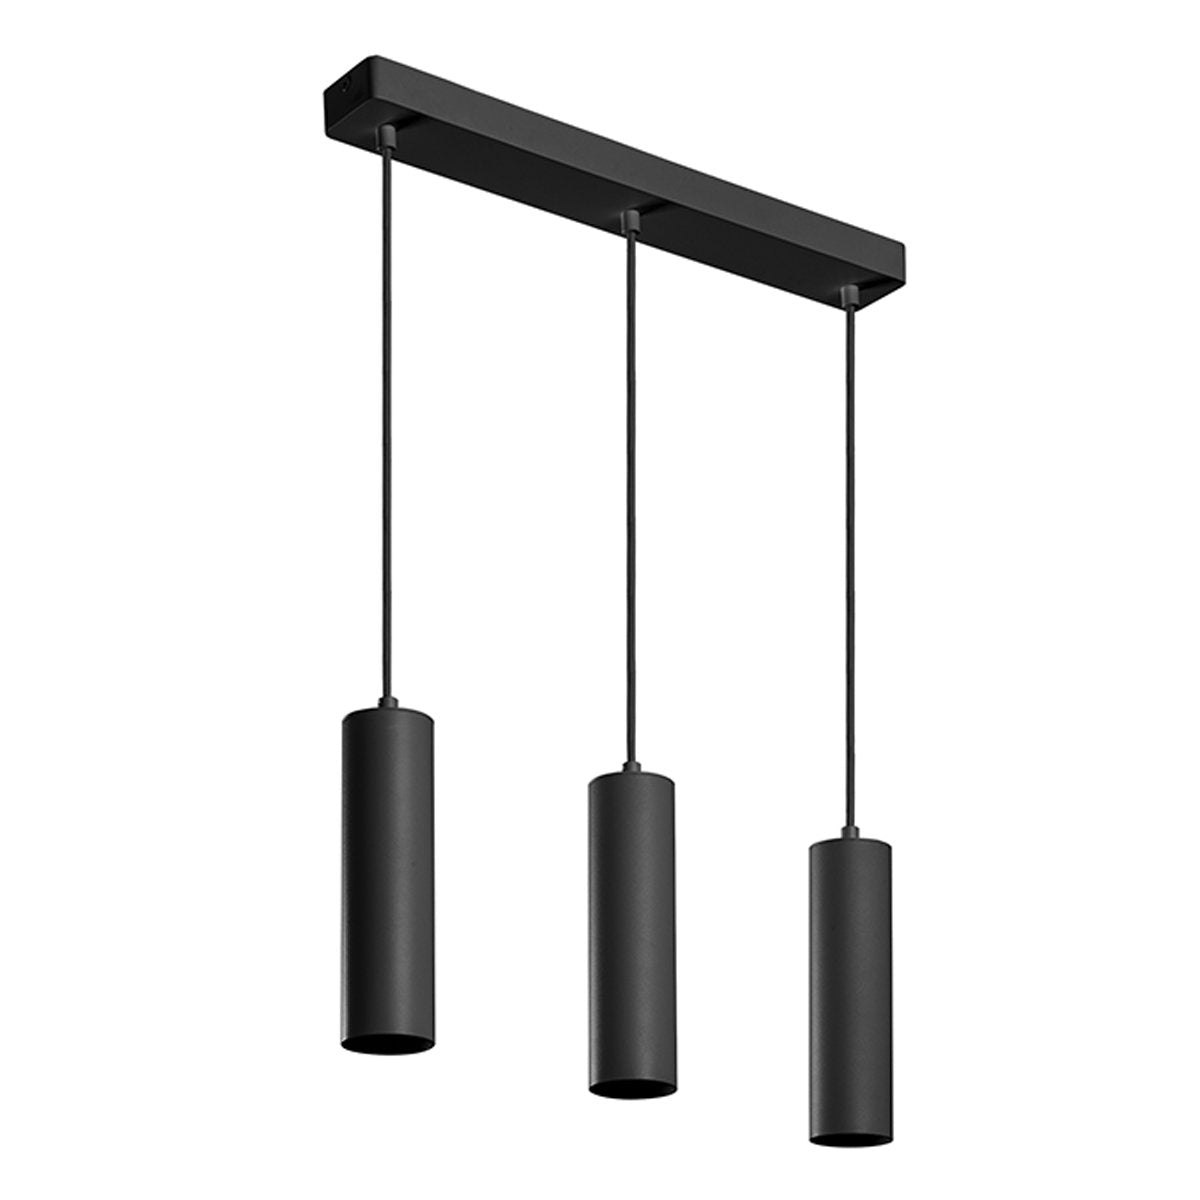 High-quality black ceiling triple hanging spotlight pendant. A cylinder pendant with a modern and sleek design would add a huge element of style and class to any room. Made of aluminium with a powder coat finish. Height can be adjusted during installation.